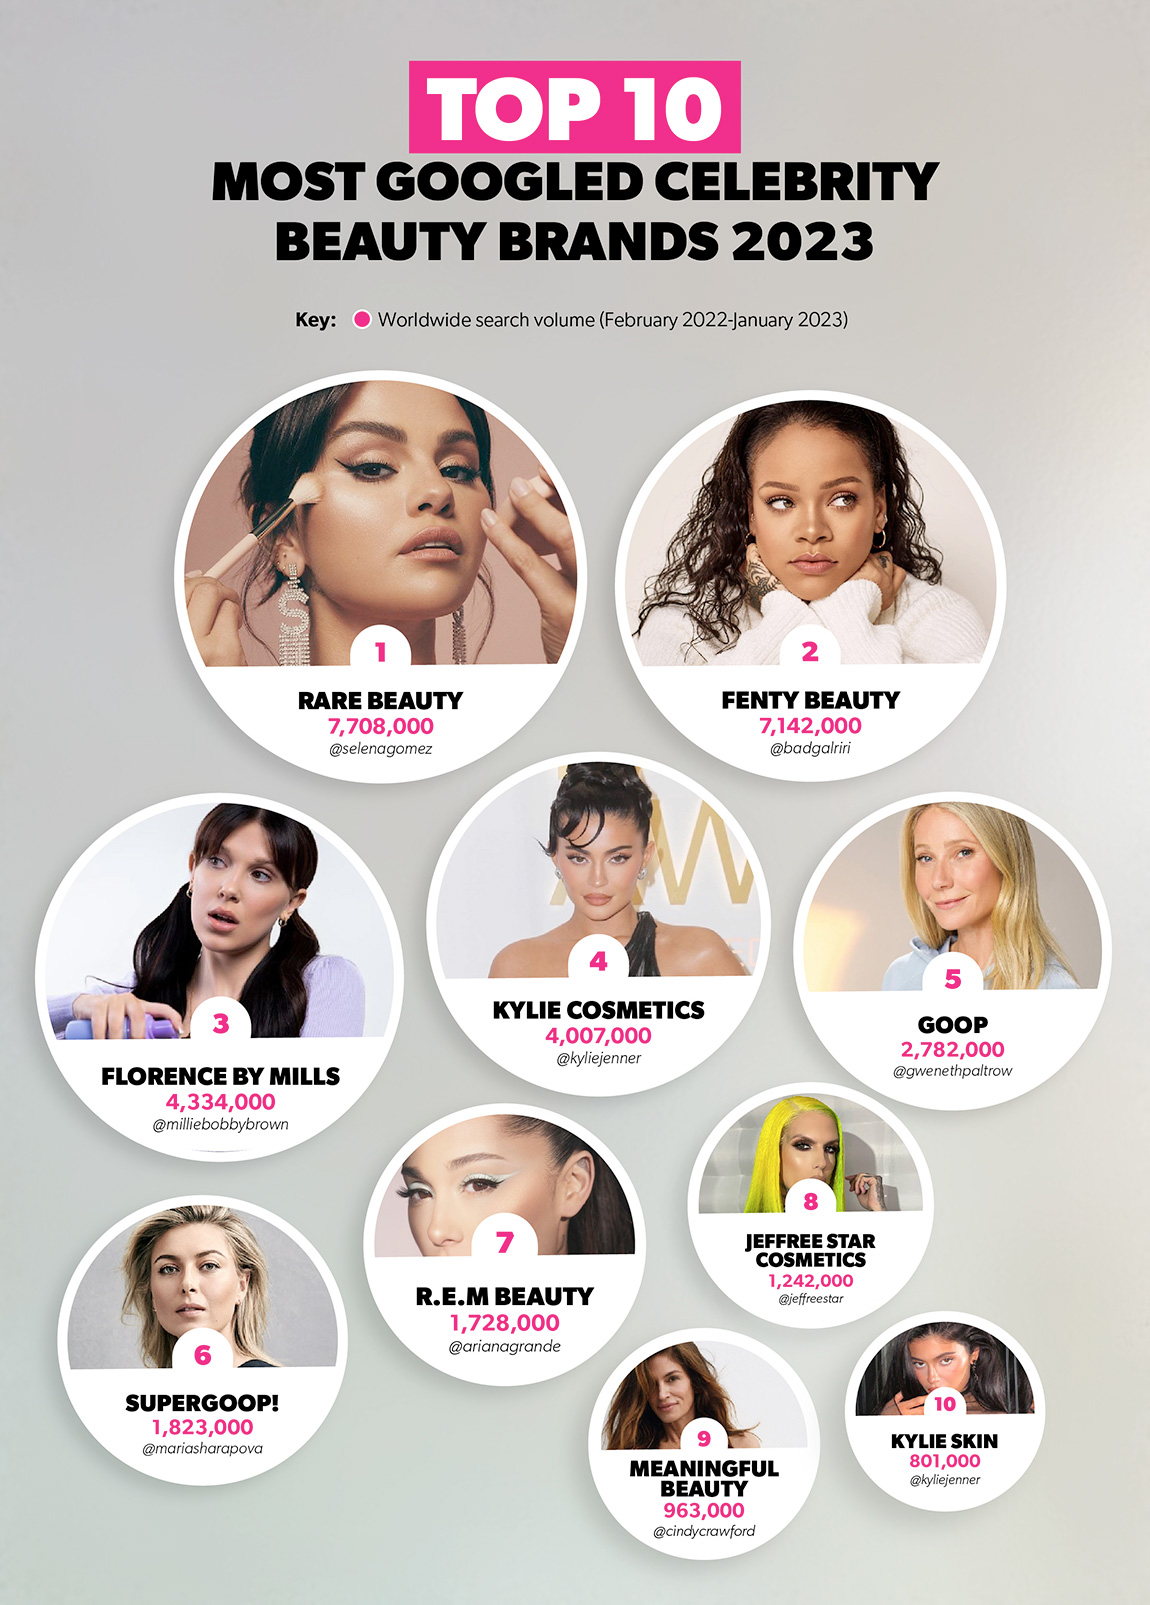 Top 7 Makeup & Beauty Brands Created by Influencers, Makeup